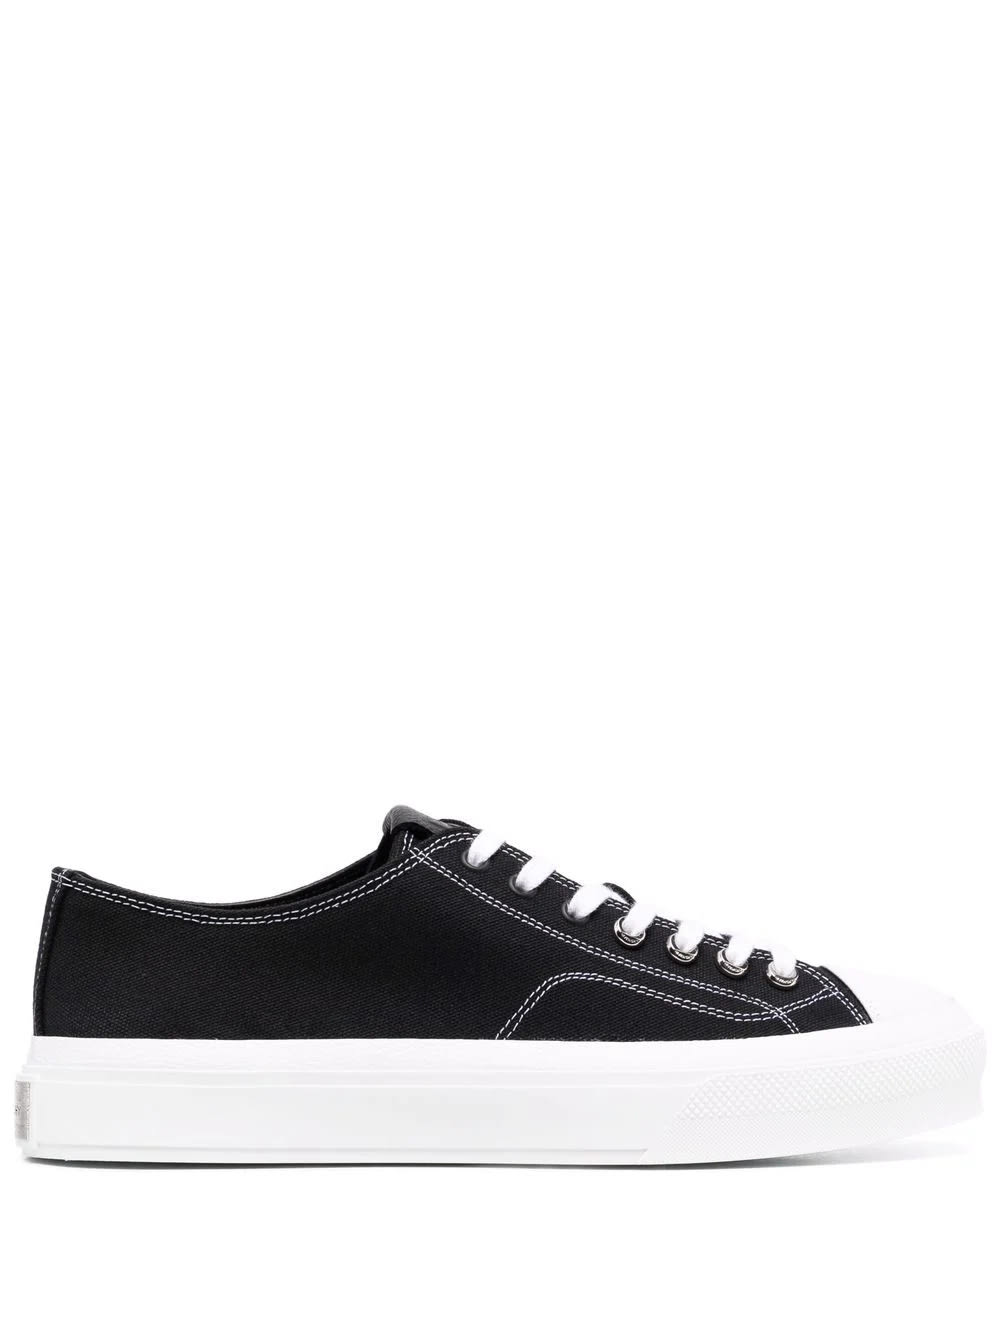 Givenchy Man Black And White City Sneakers In Canvas And Grain Leather